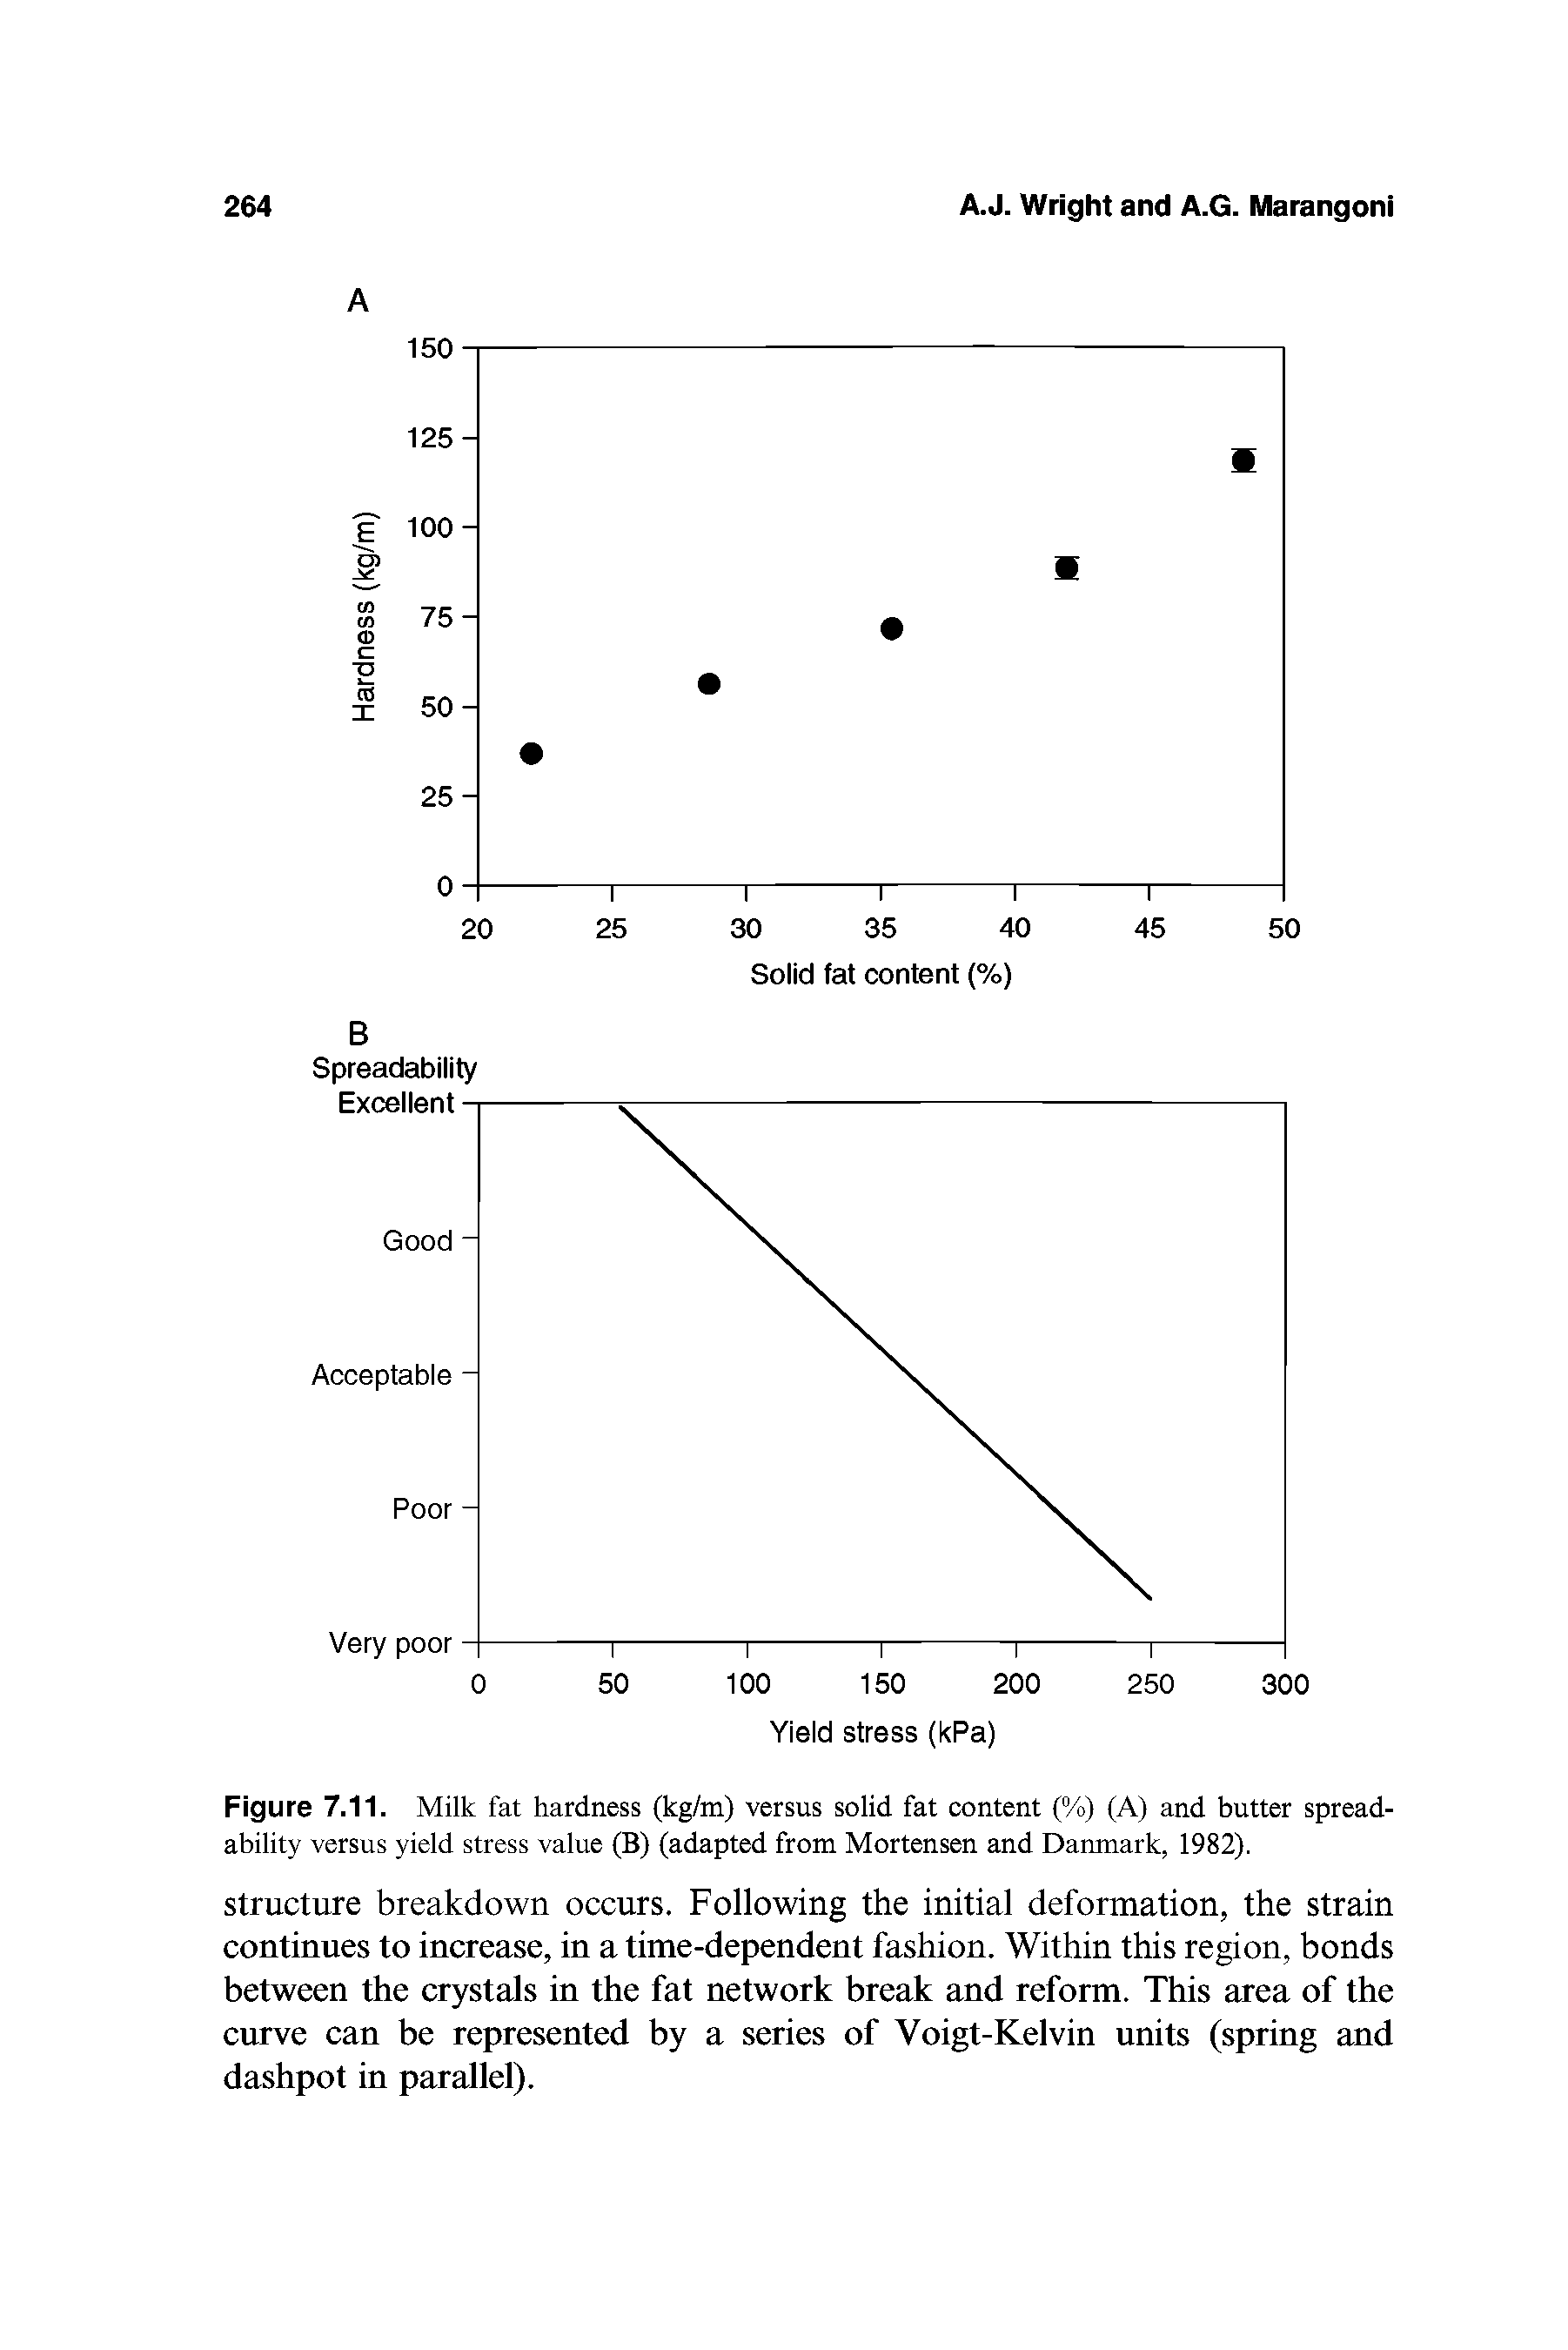 Figure 7.11. Milk fat hardness (kg/m) versus solid fat content (%) (A) and butter spread-ability versus yield stress value (B) (adapted from Mortensen and Danmark, 1982).